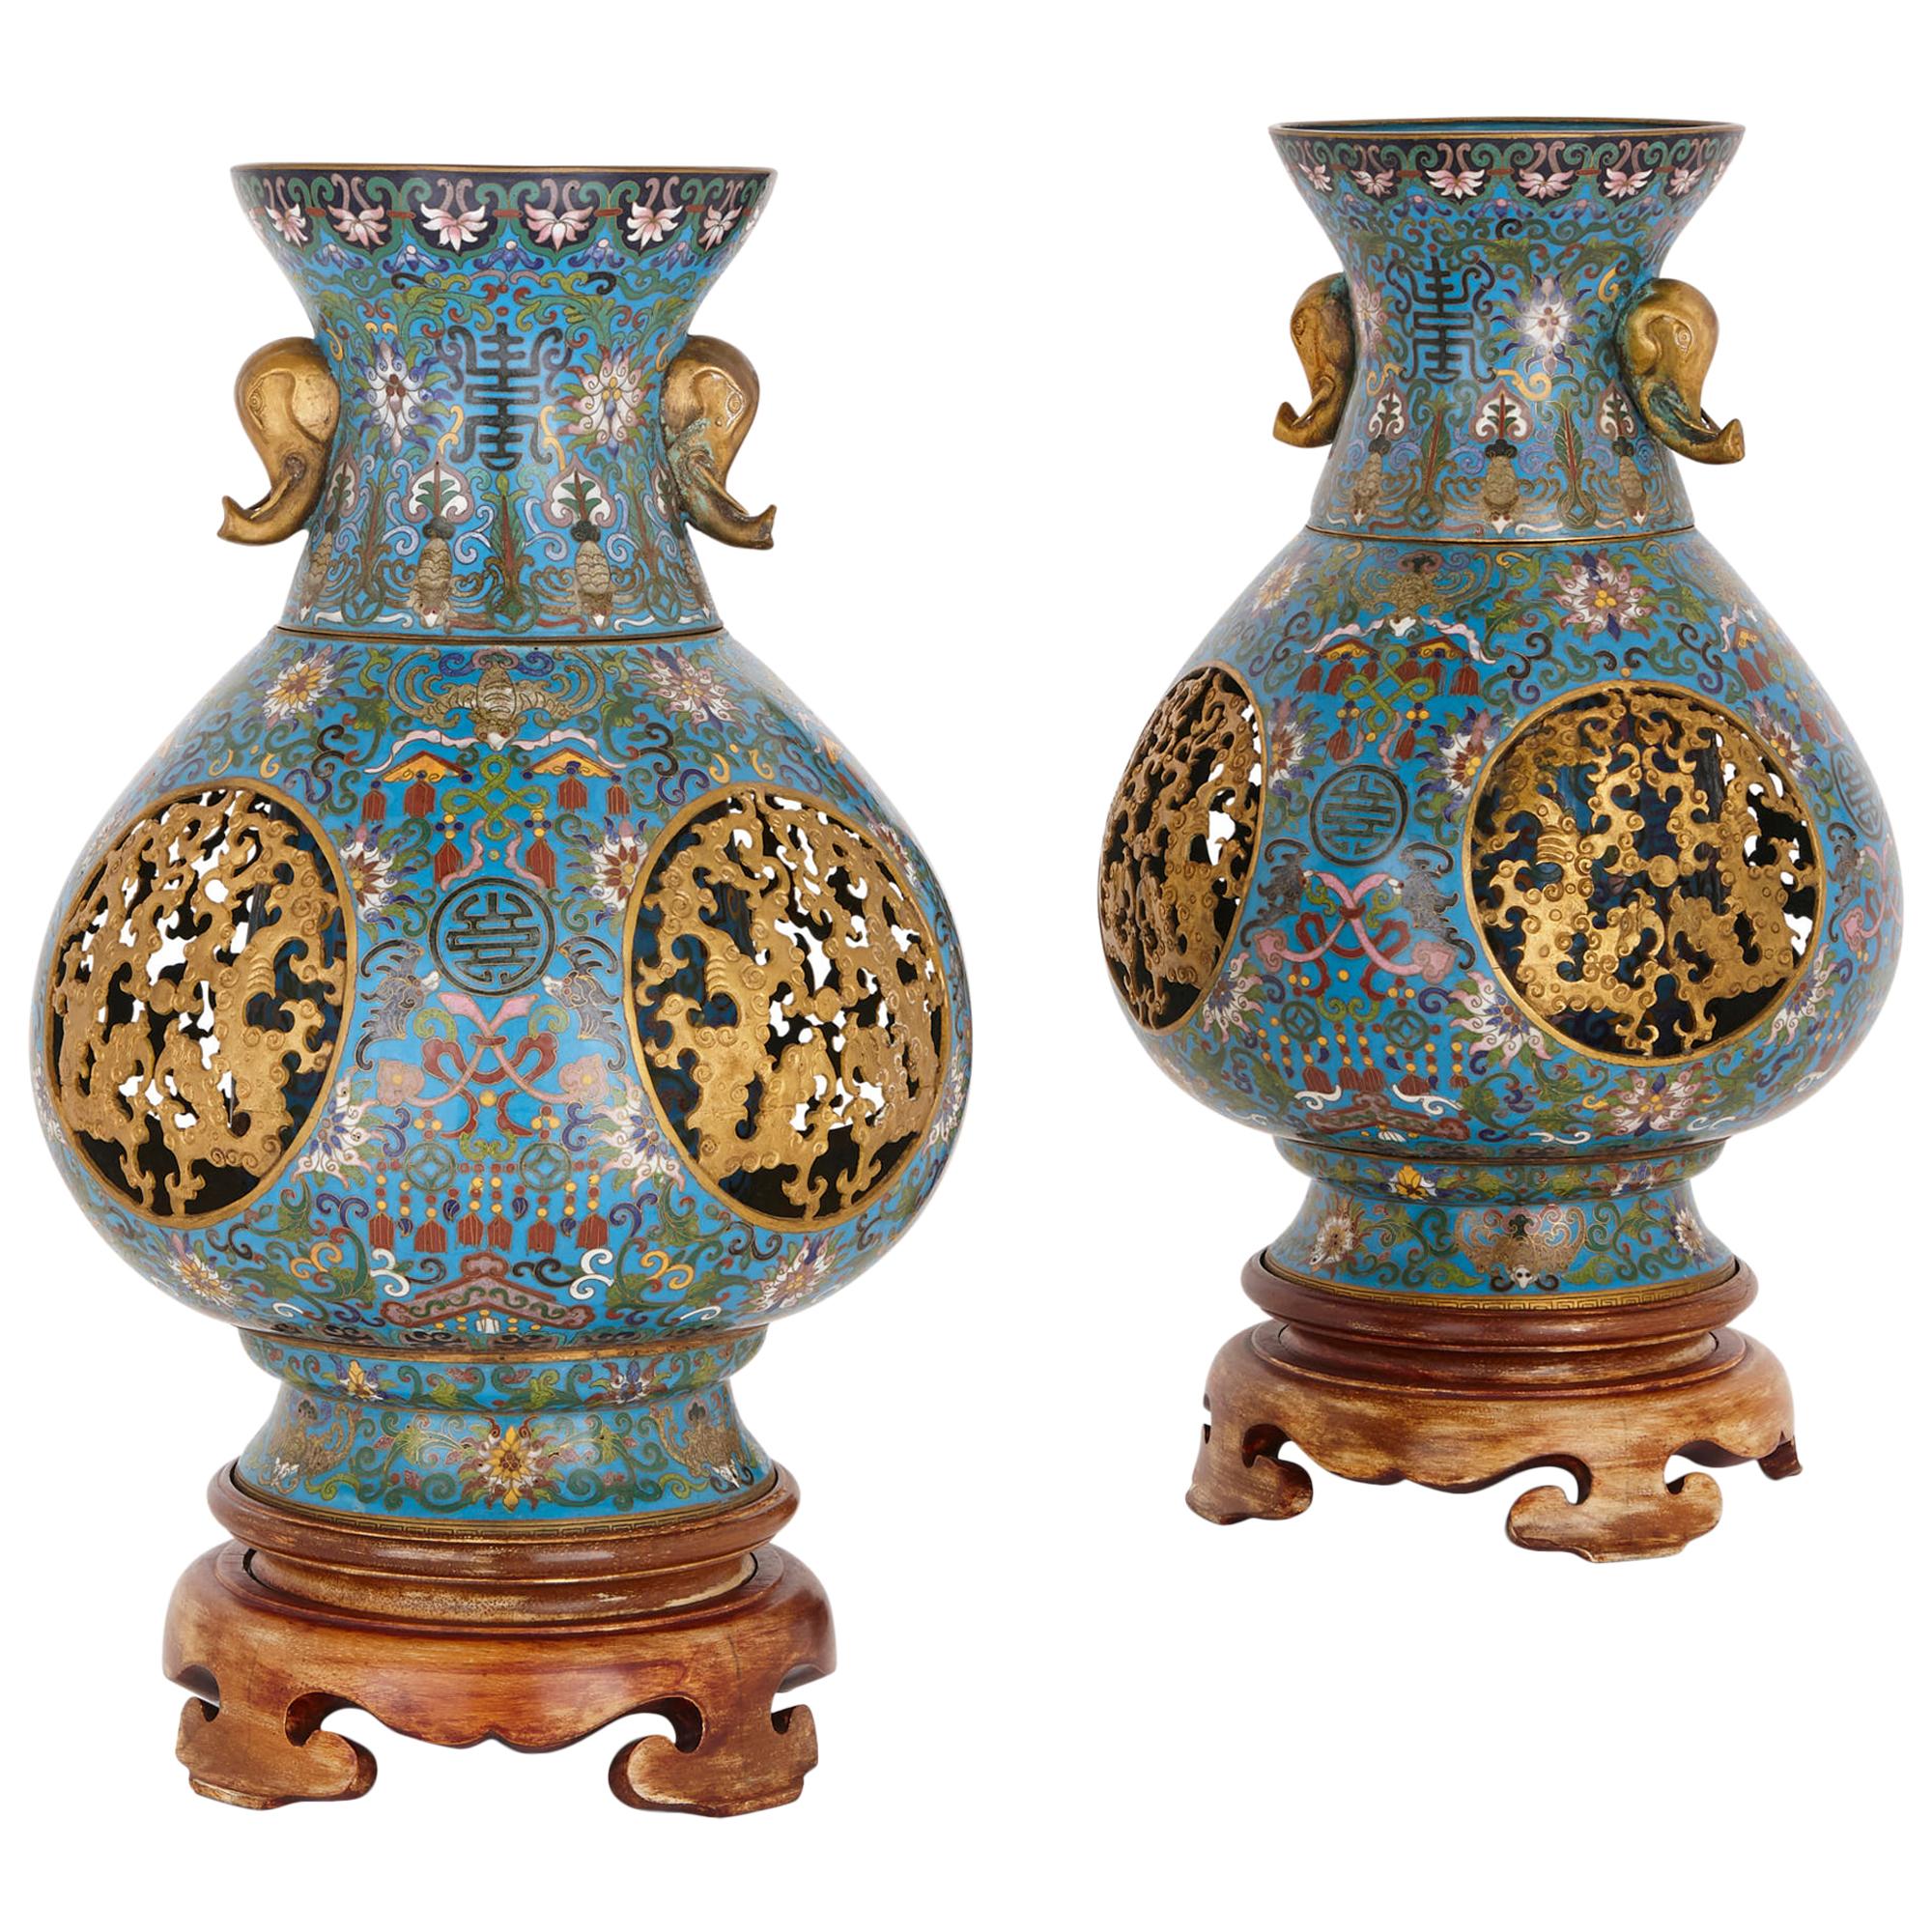 Two Late Qing Dynasty Cloisonné Enamel and Gilt Bronze Vases